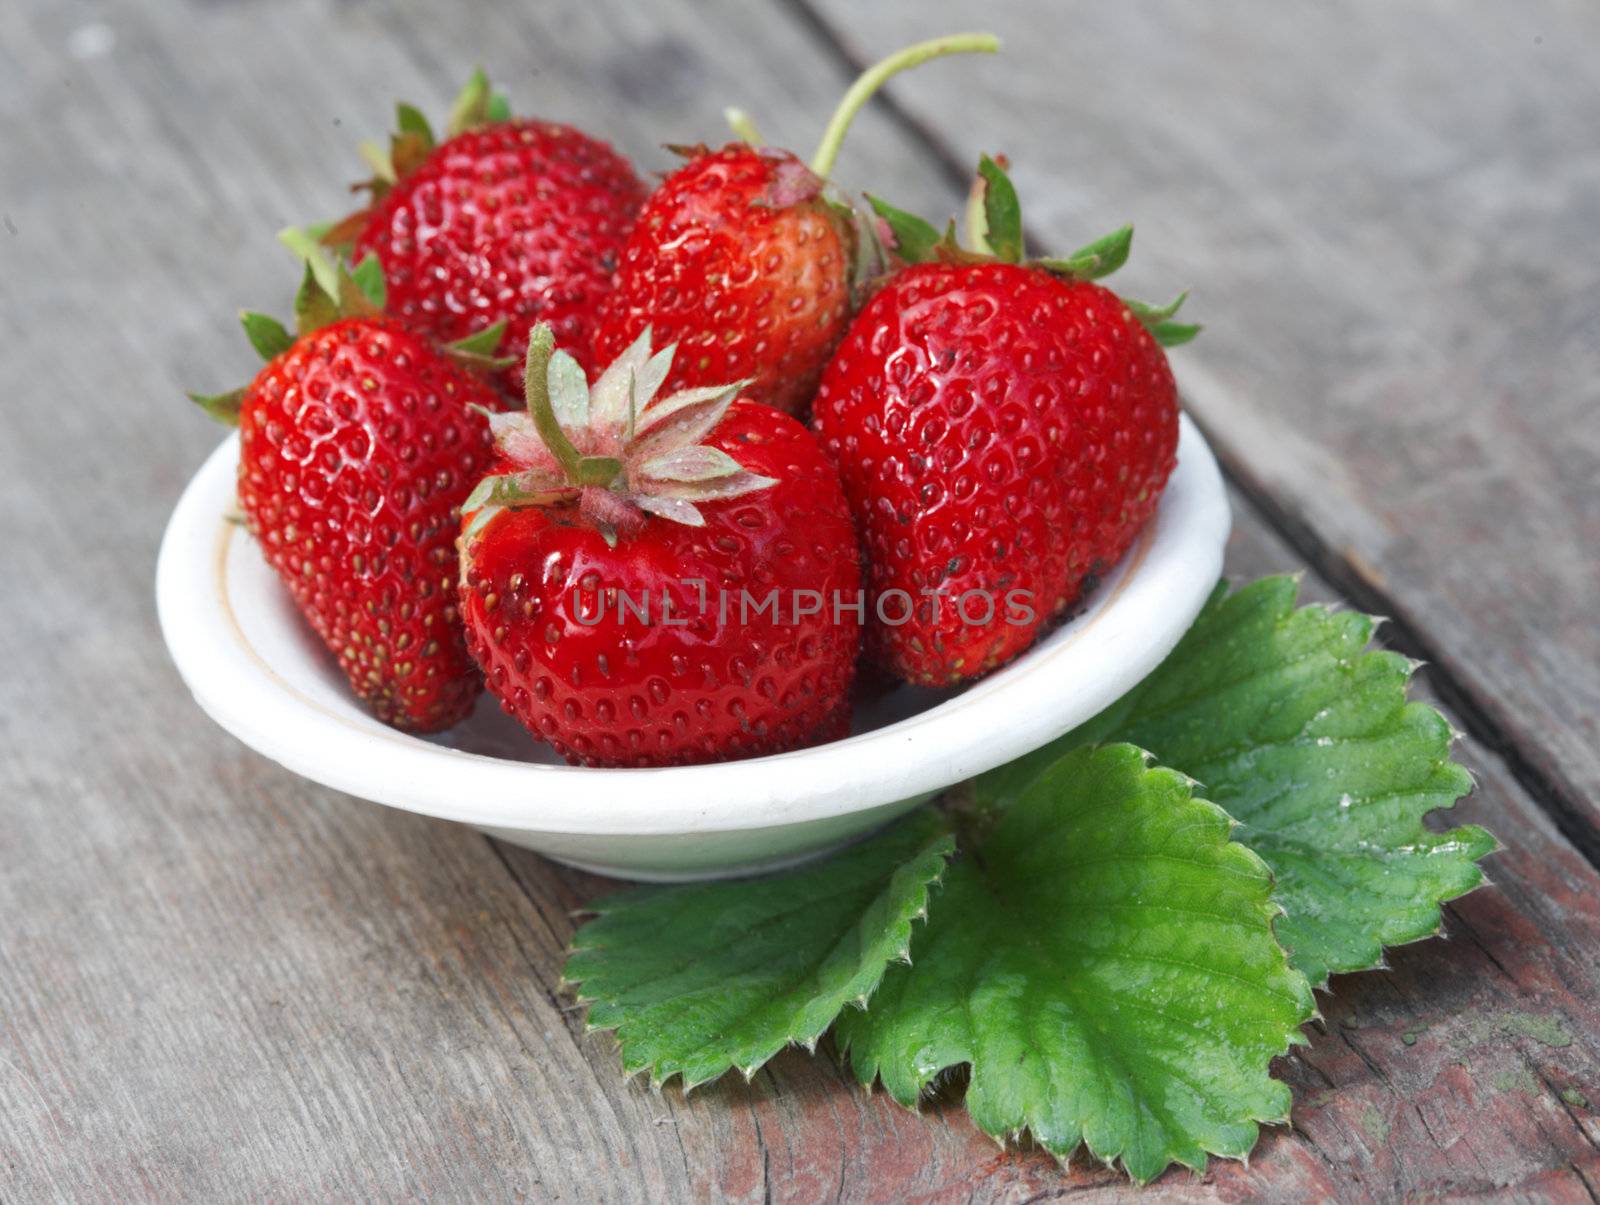 Wild strawberry in saucer on a wooden table